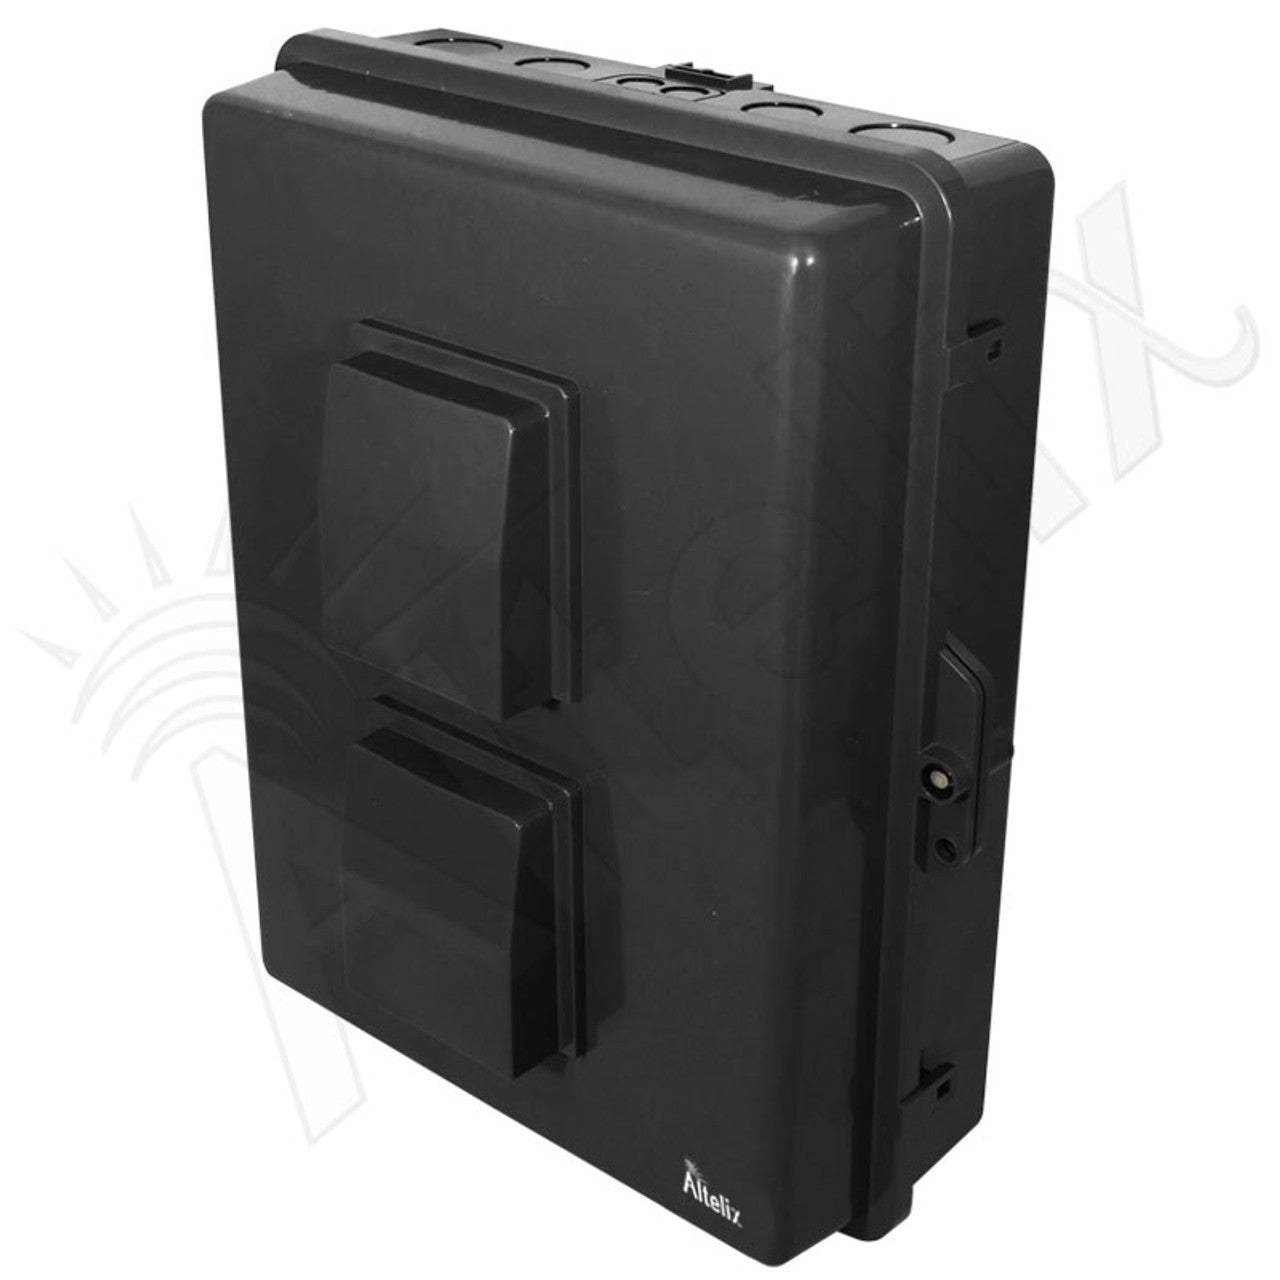 Buy black Altelix 17x14x6 Vented Polycarbonate + ABS Weatherproof NEMA Enclosure with 120 VAC Outlets, Power Cord &amp; 85¬∞F Turn-On Cooling Fan